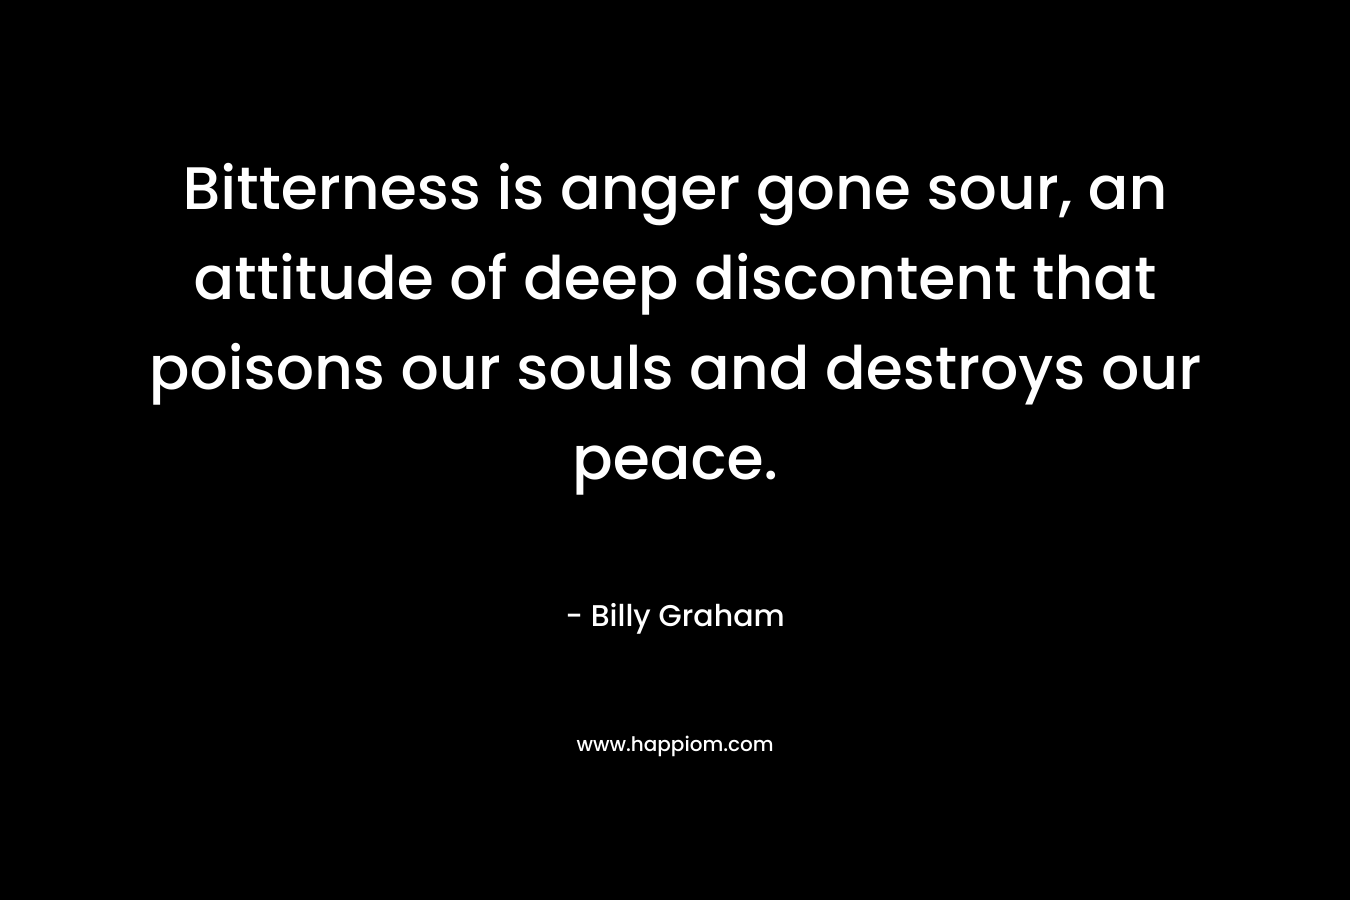 Bitterness is anger gone sour, an attitude of deep discontent that poisons our souls and destroys our peace. – Billy Graham